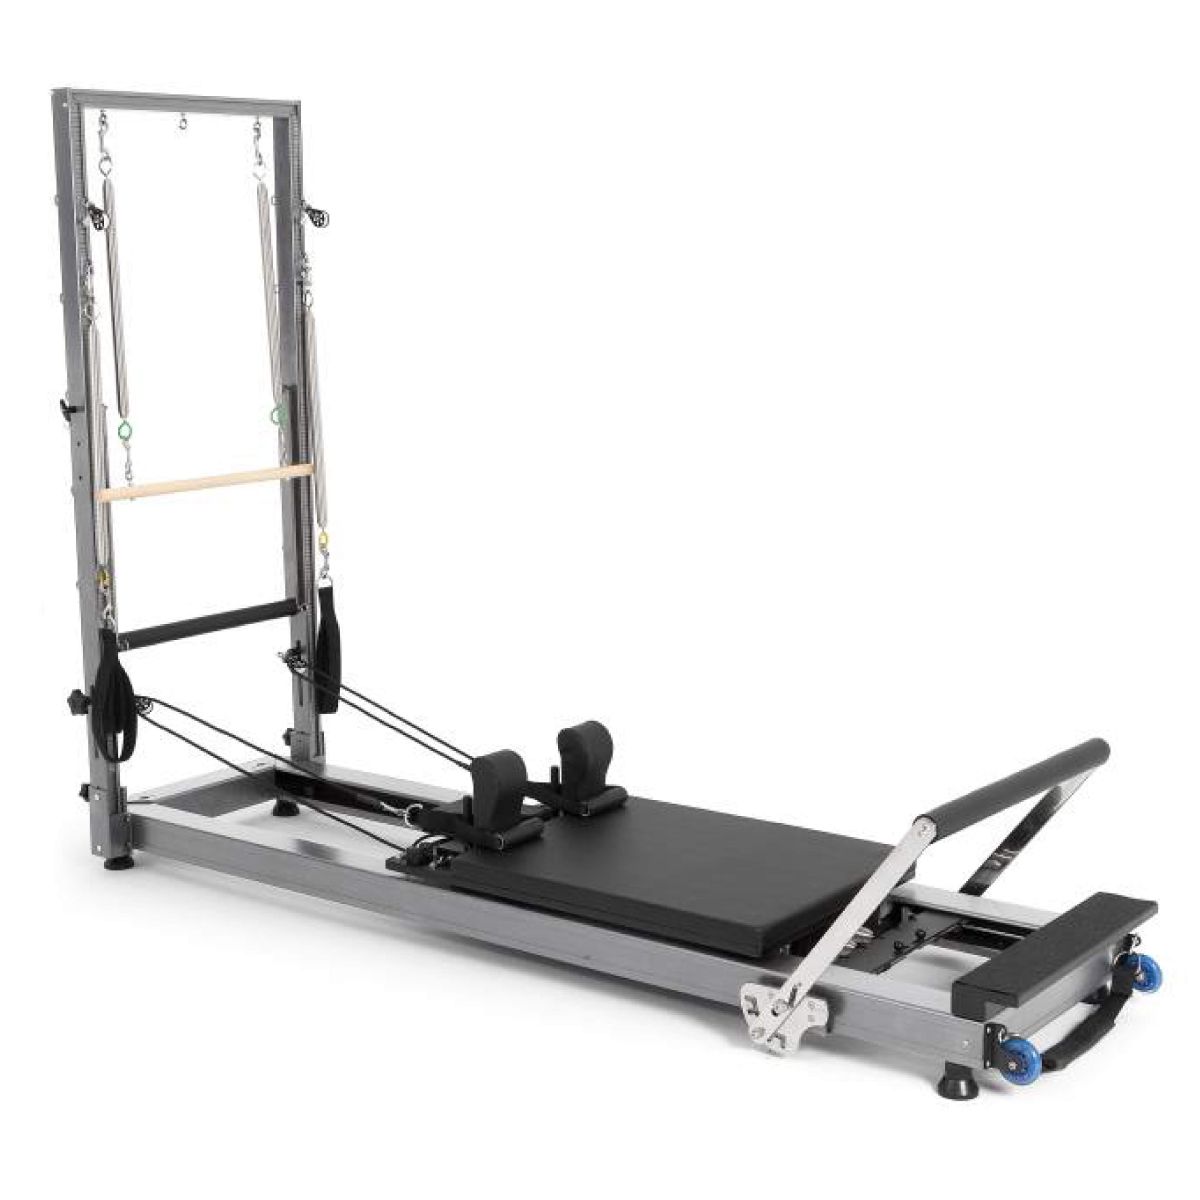 Aluminium reformer HL with tower